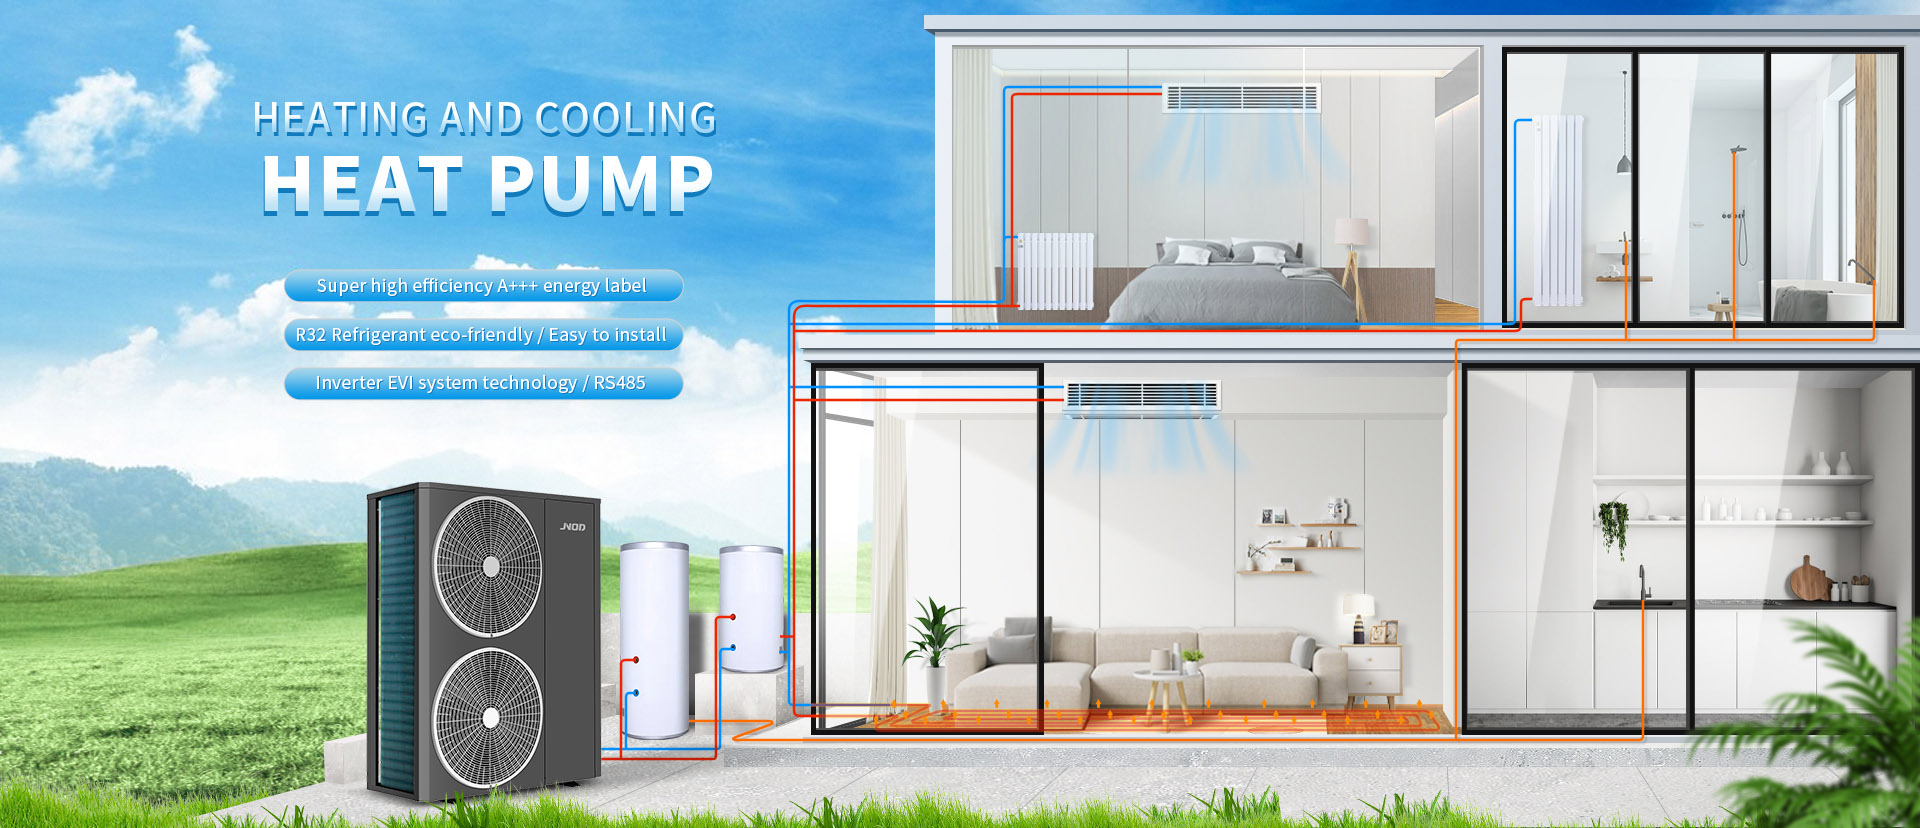 Air Heating And Cooling Heat Pump